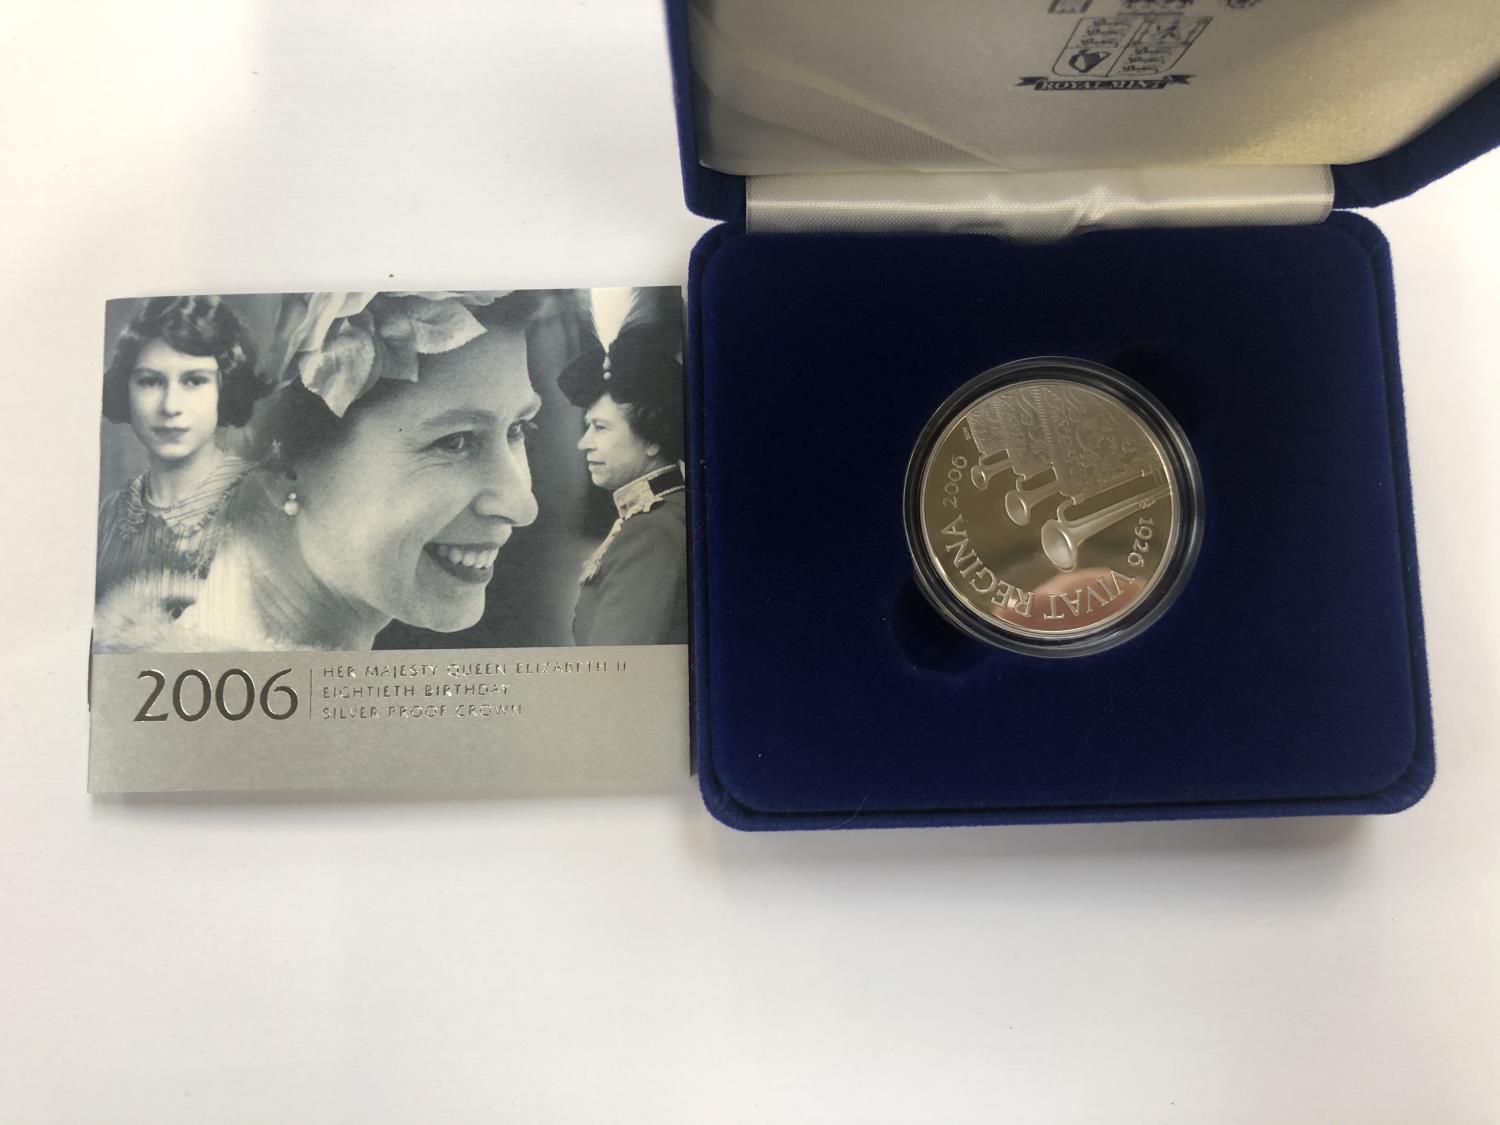 UK ROYAL MINT "2006 EIGHTIETH BIRTHDAY SILVER PROOF CROWN", ENCAPSULATED AND BOXED WITH C.O.A